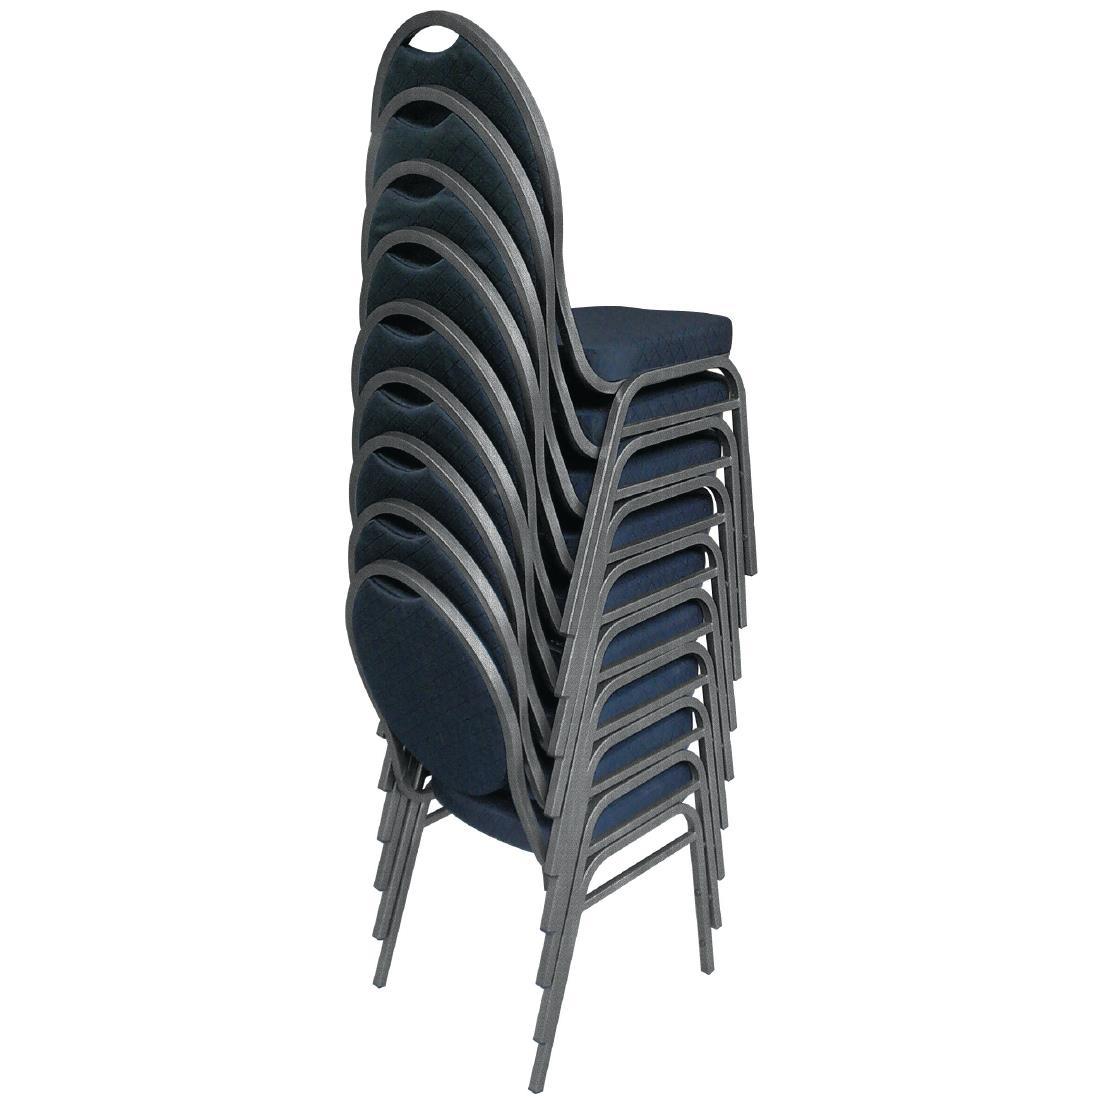 Bolero Oval Back Banquet Chairs Grey & Black (Pack of 4) - CE142  - 3